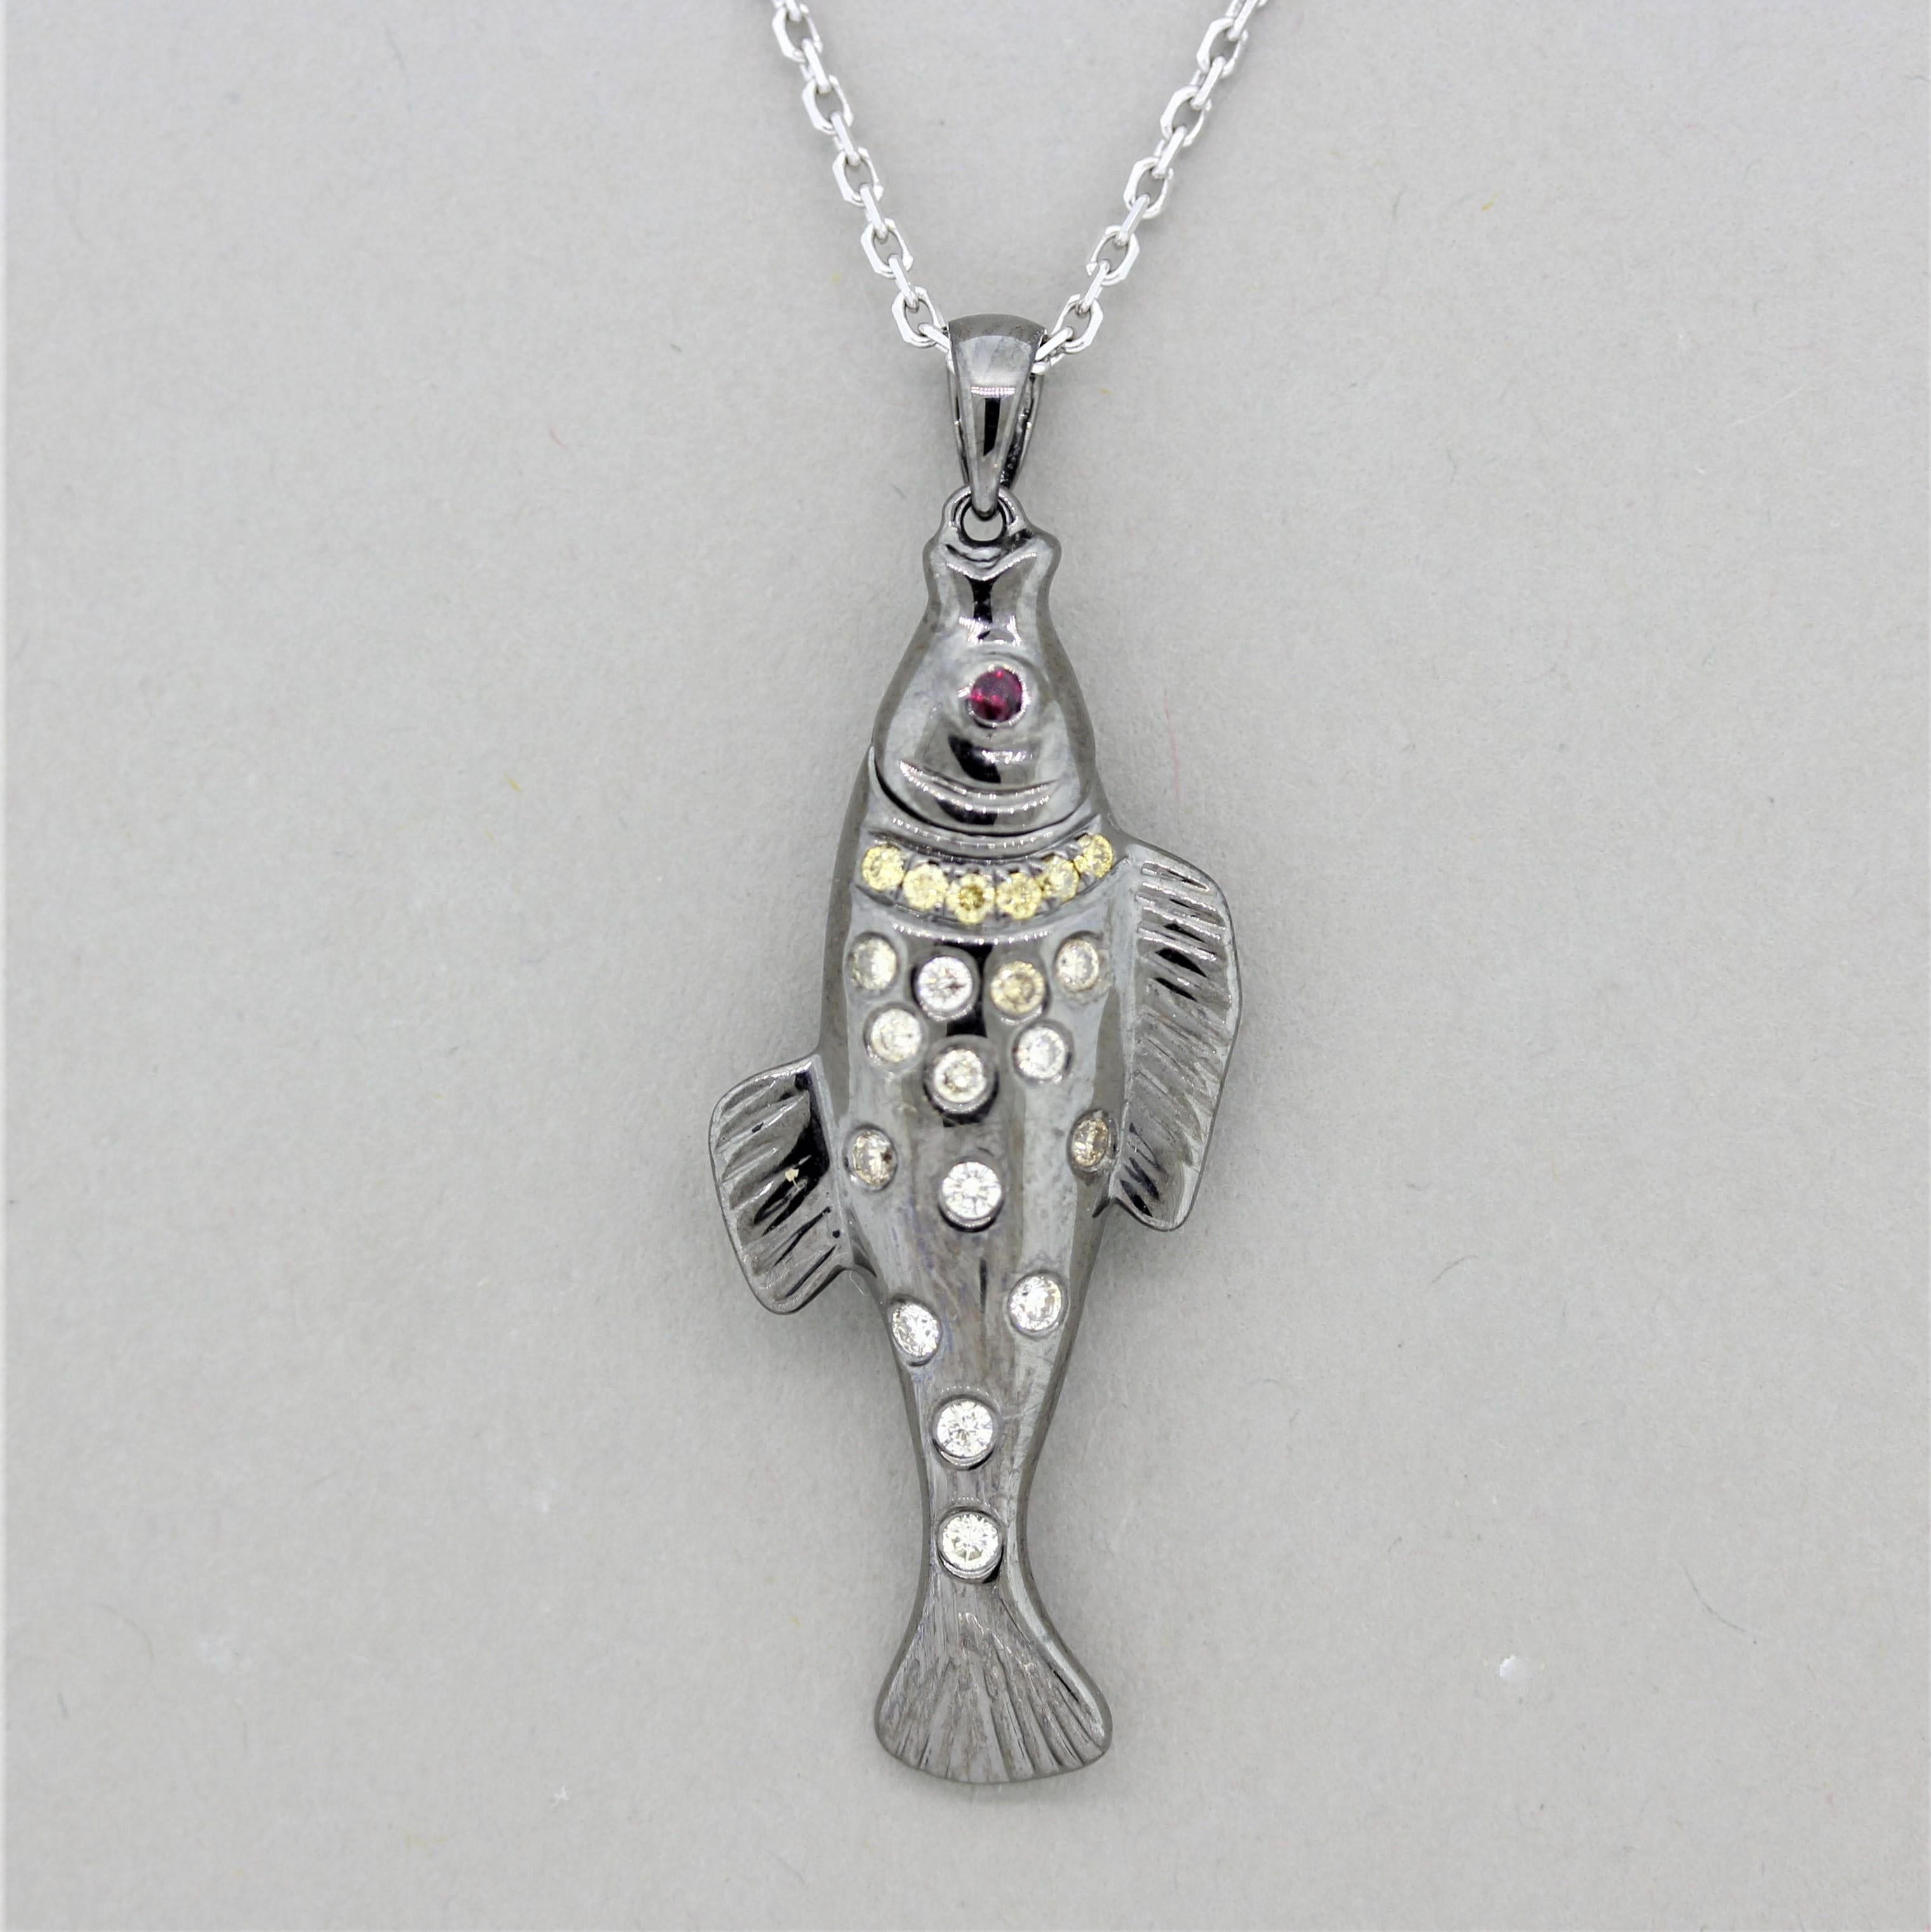 A lovely pendant of a wild fish! It is accented by 0.23 carats of round brilliant white and fancy yellow colored diamonds. Adding to that is a single round cut ruby used as the fish’s eye. The pendant is finished with a rhodium plating which gives